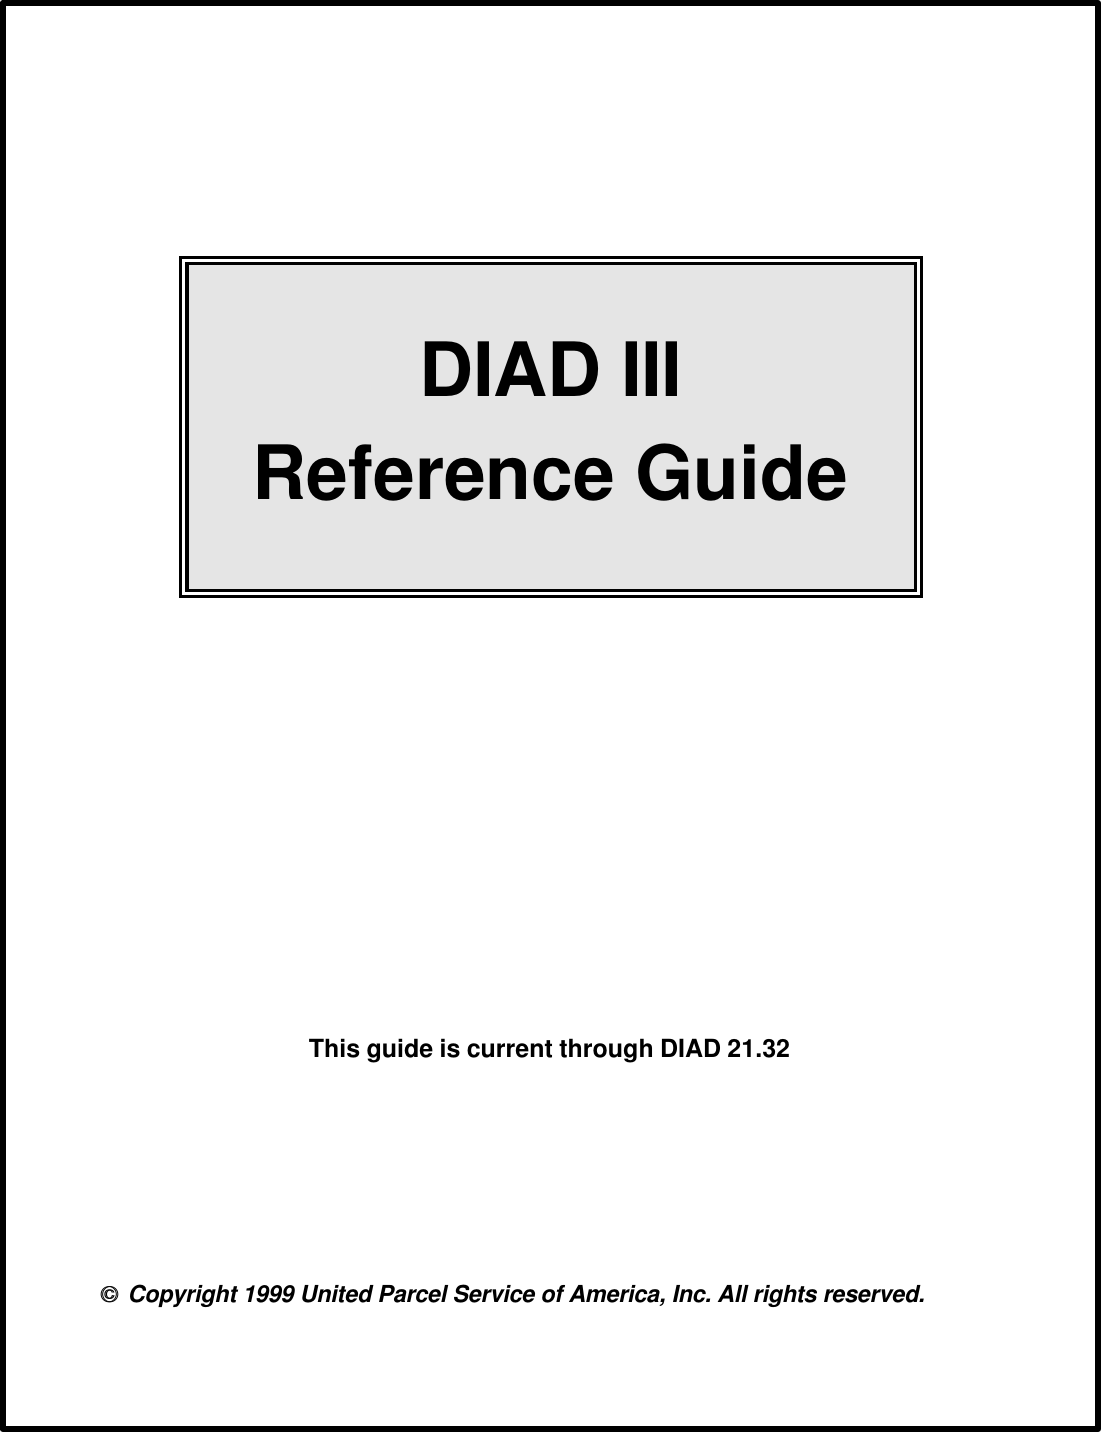 DIAD IIIReference Guide Copyright 1999 United Parcel Service of America, Inc. All rights reserved.This guide is current through DIAD 21.32